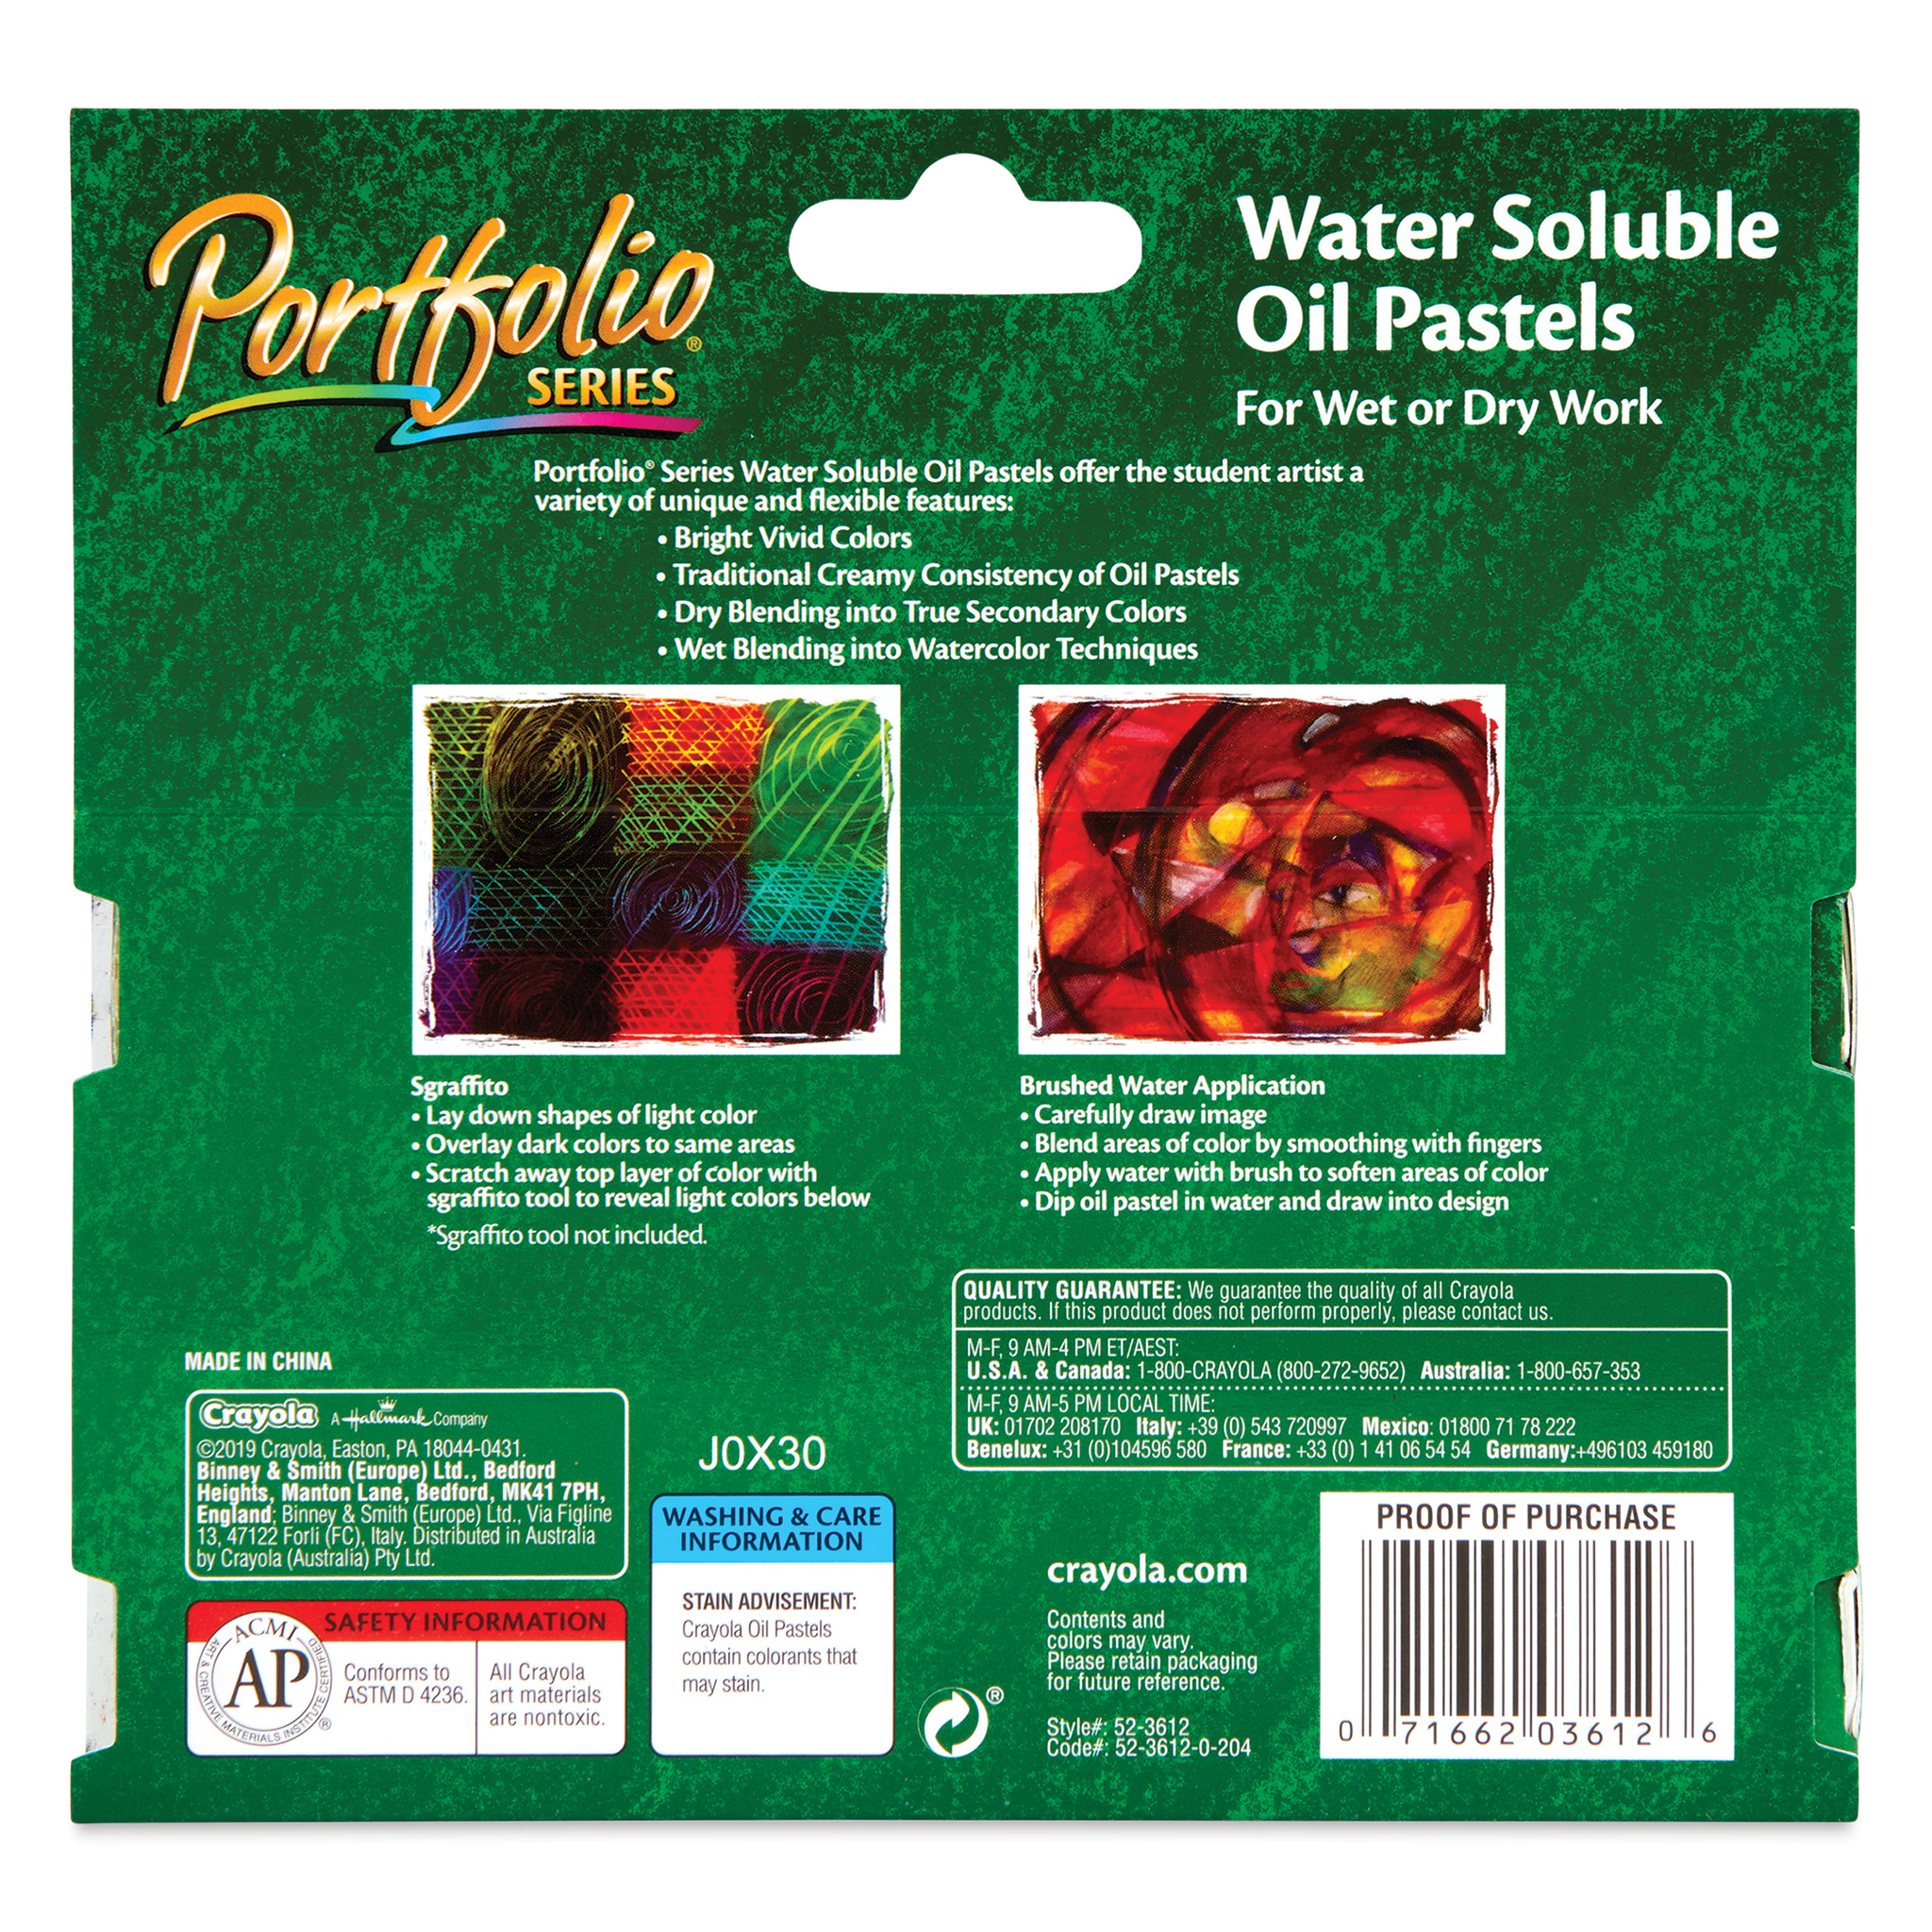 Product Review -- Portfolio Watersoluble Oil Pastels